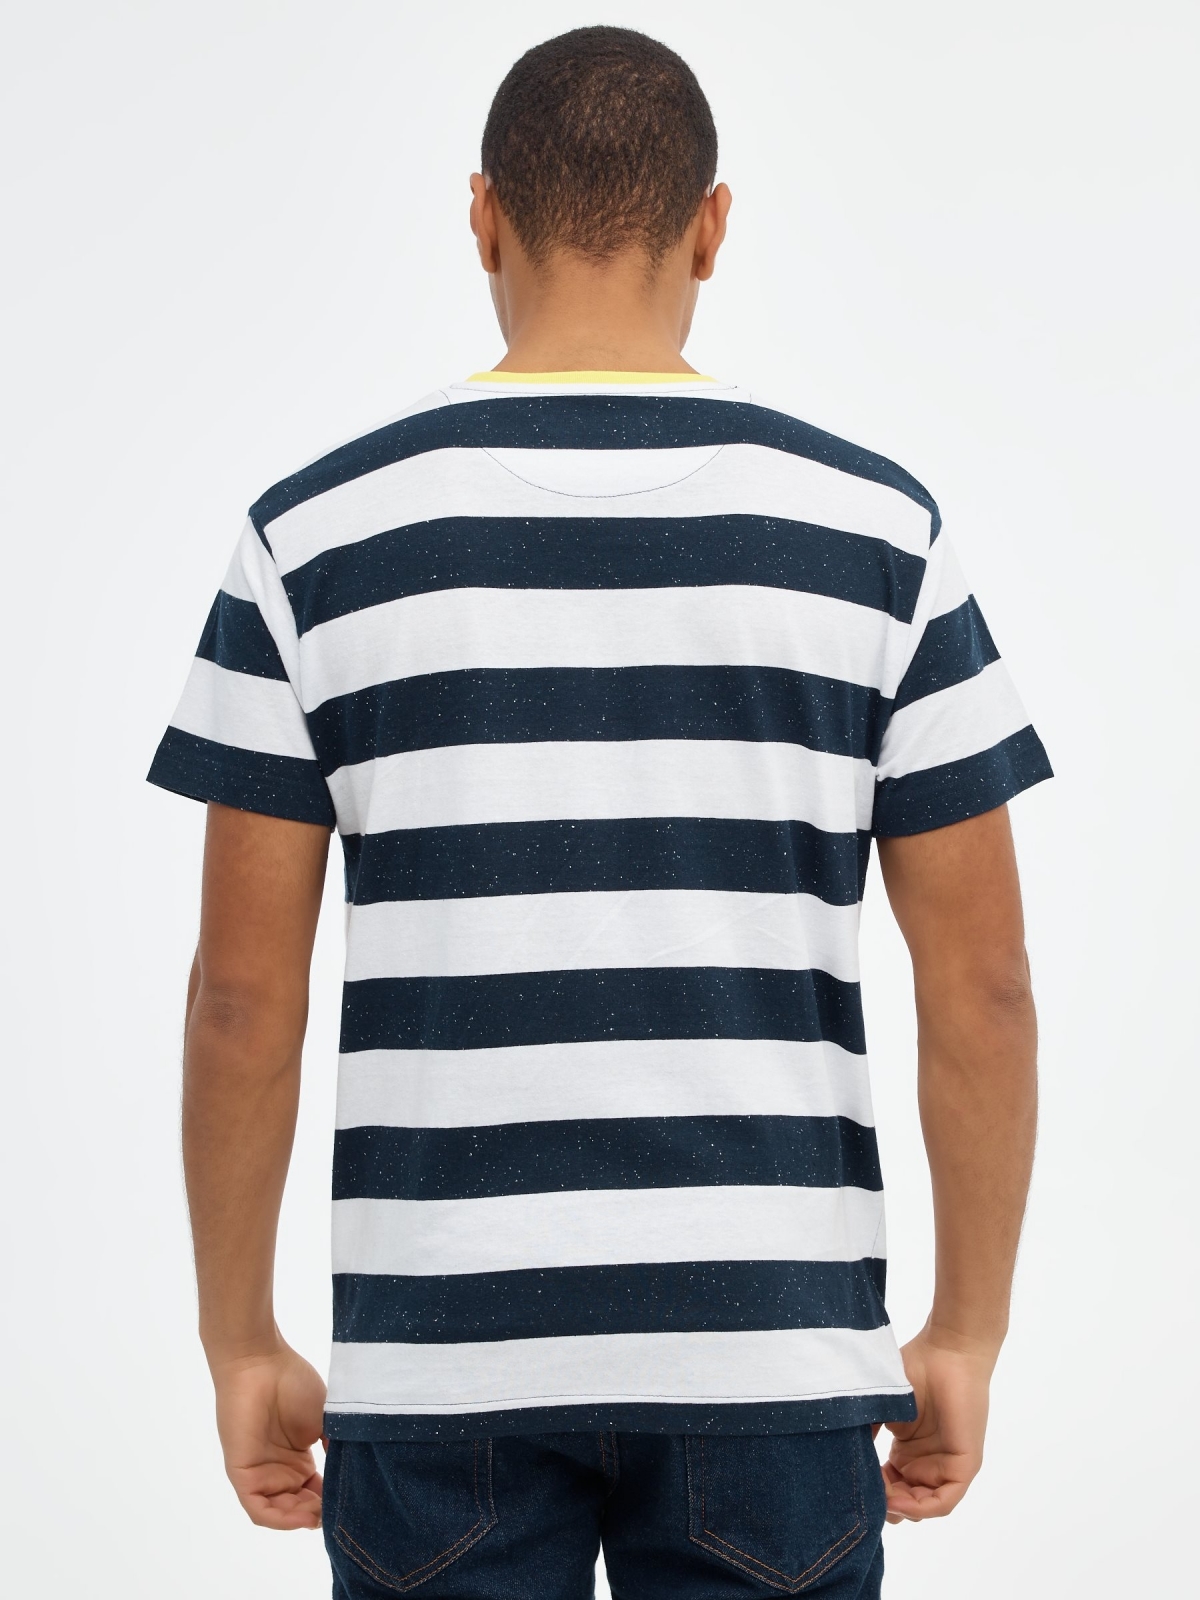 Striped T-shirt with collar | Men's T-Shirts | INSIDE